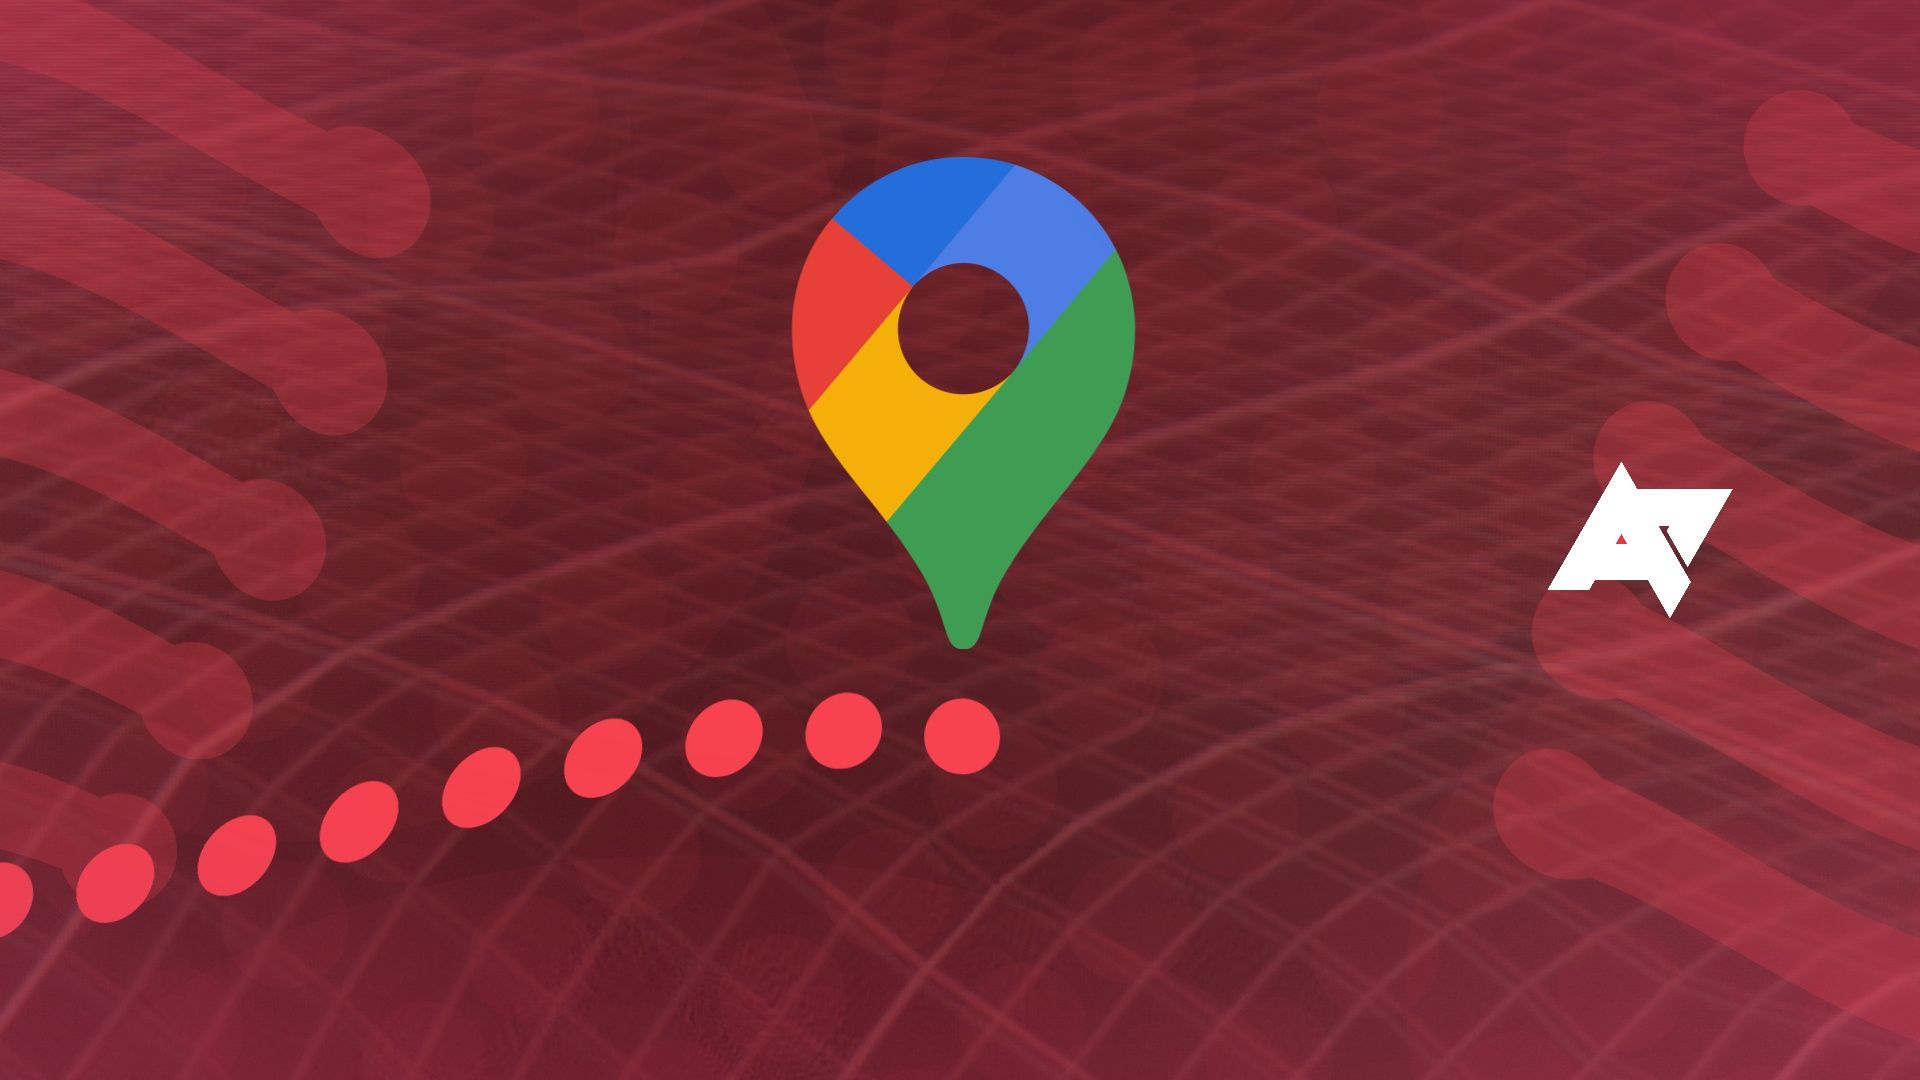 google maps icon in the center embedded on red wavey grid patterns background